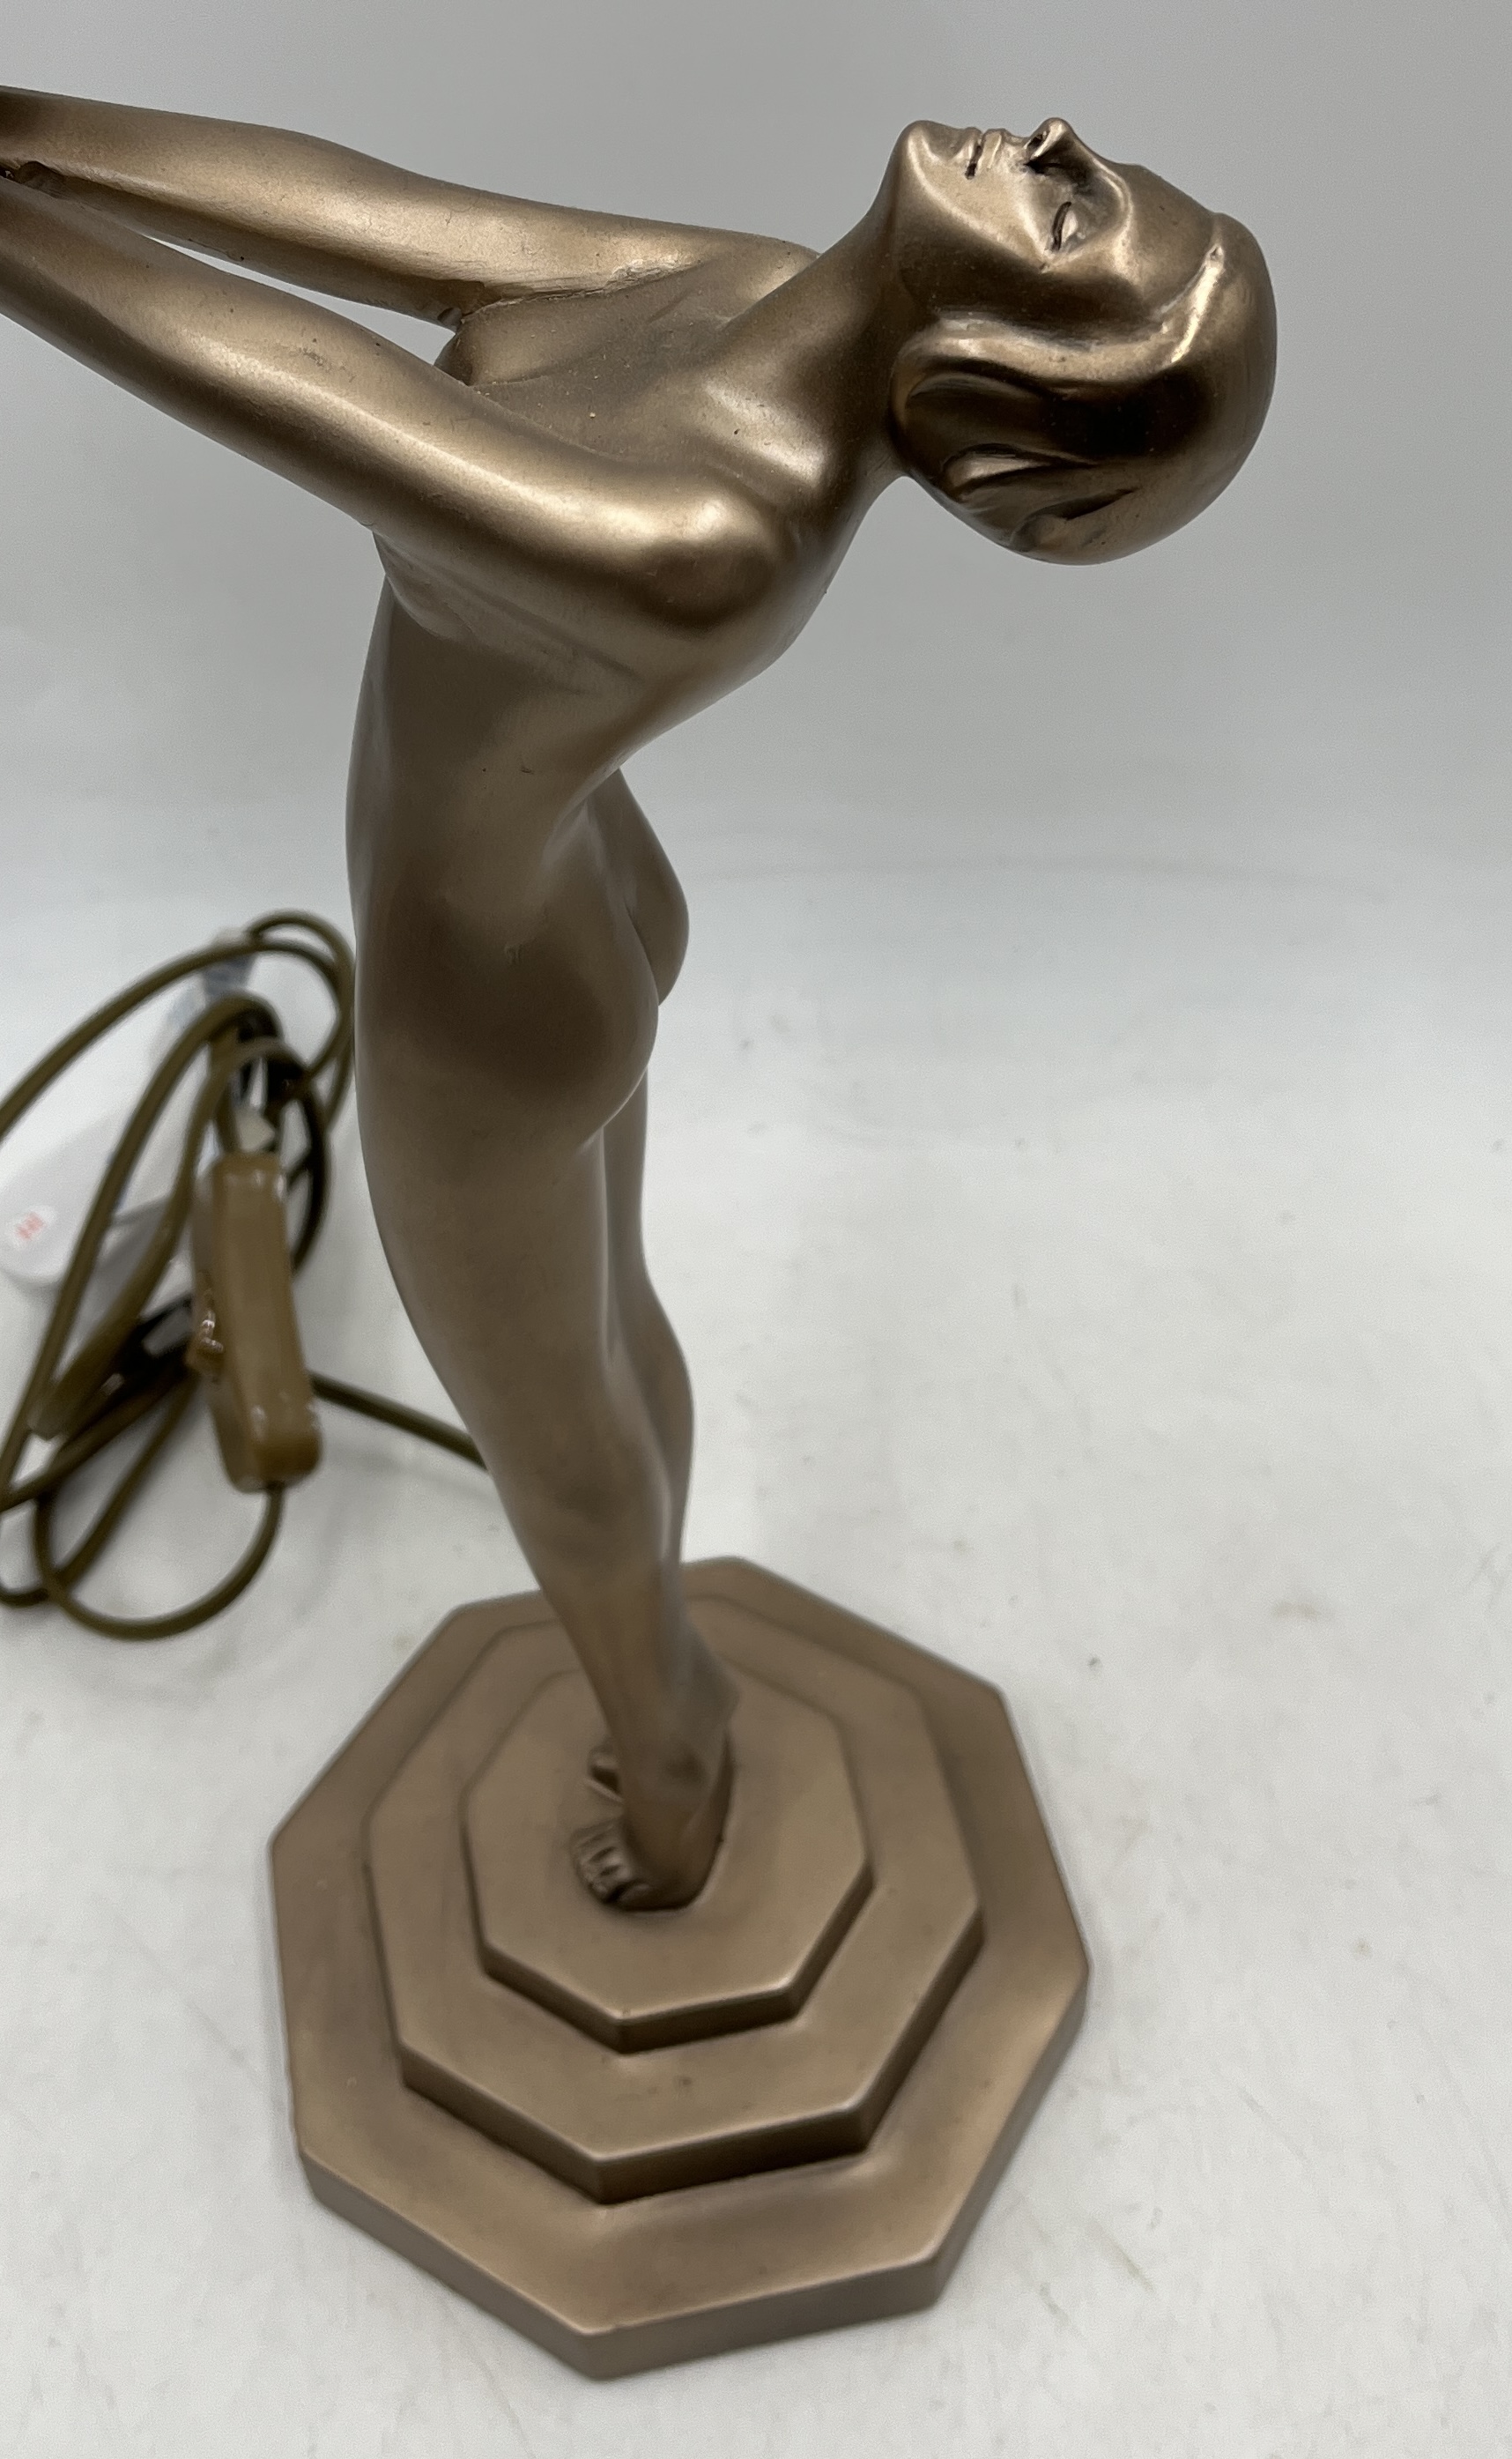 An Art Deco style table lamp in the form of a nude female holding a globe - Overall height 50cm - Image 2 of 2